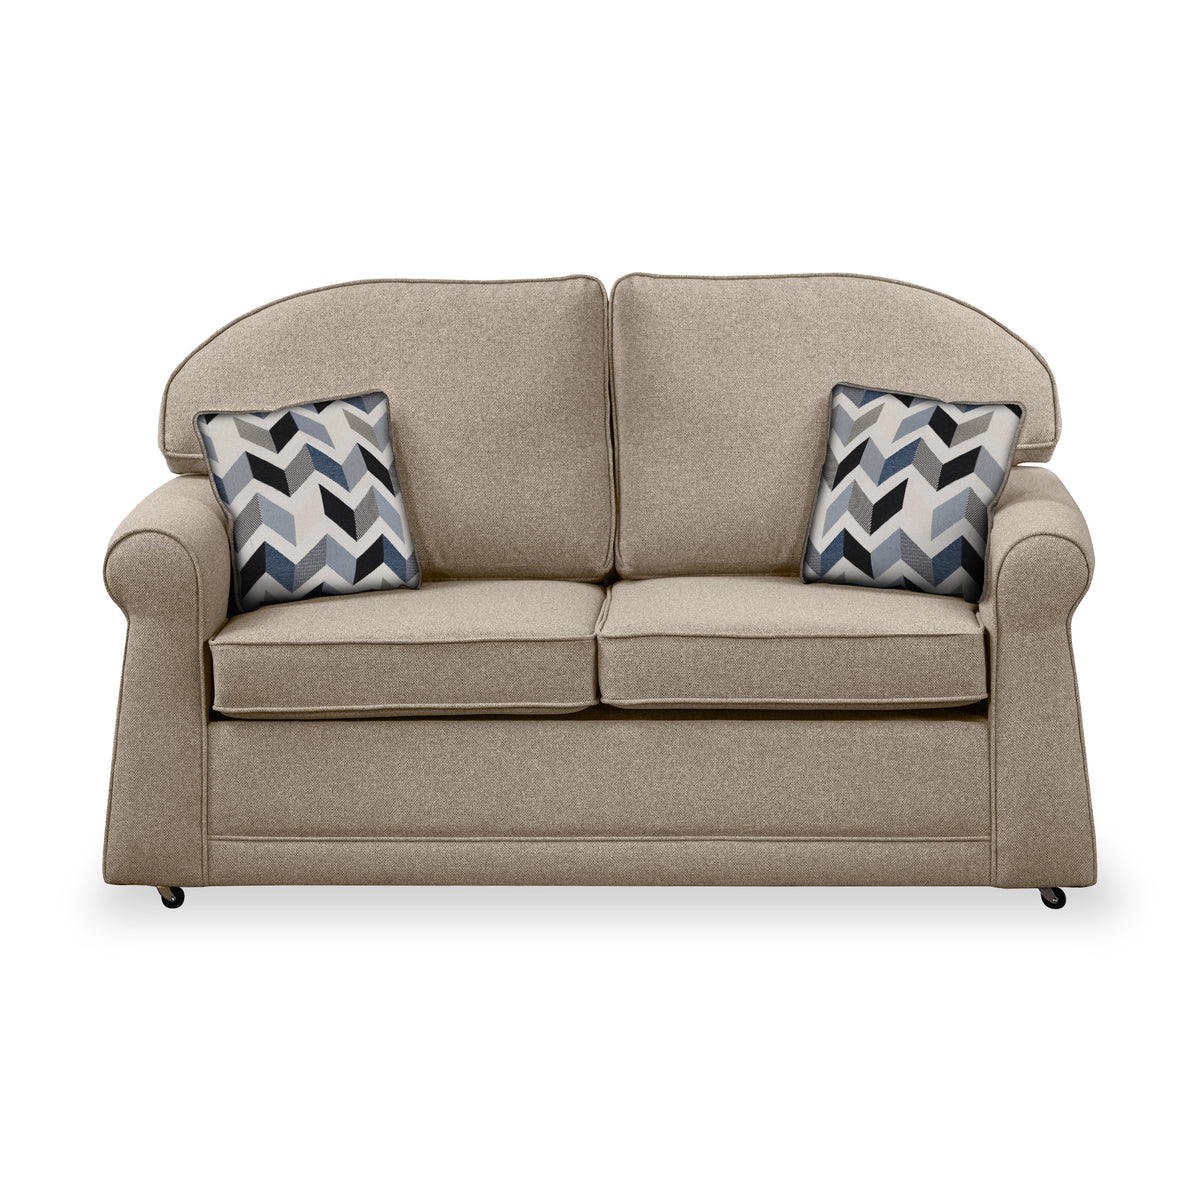 Croxdon Oatmeal Faux Linen 2 Seater Sofabed with Denim Scatter Cushions from Roseland Furniture